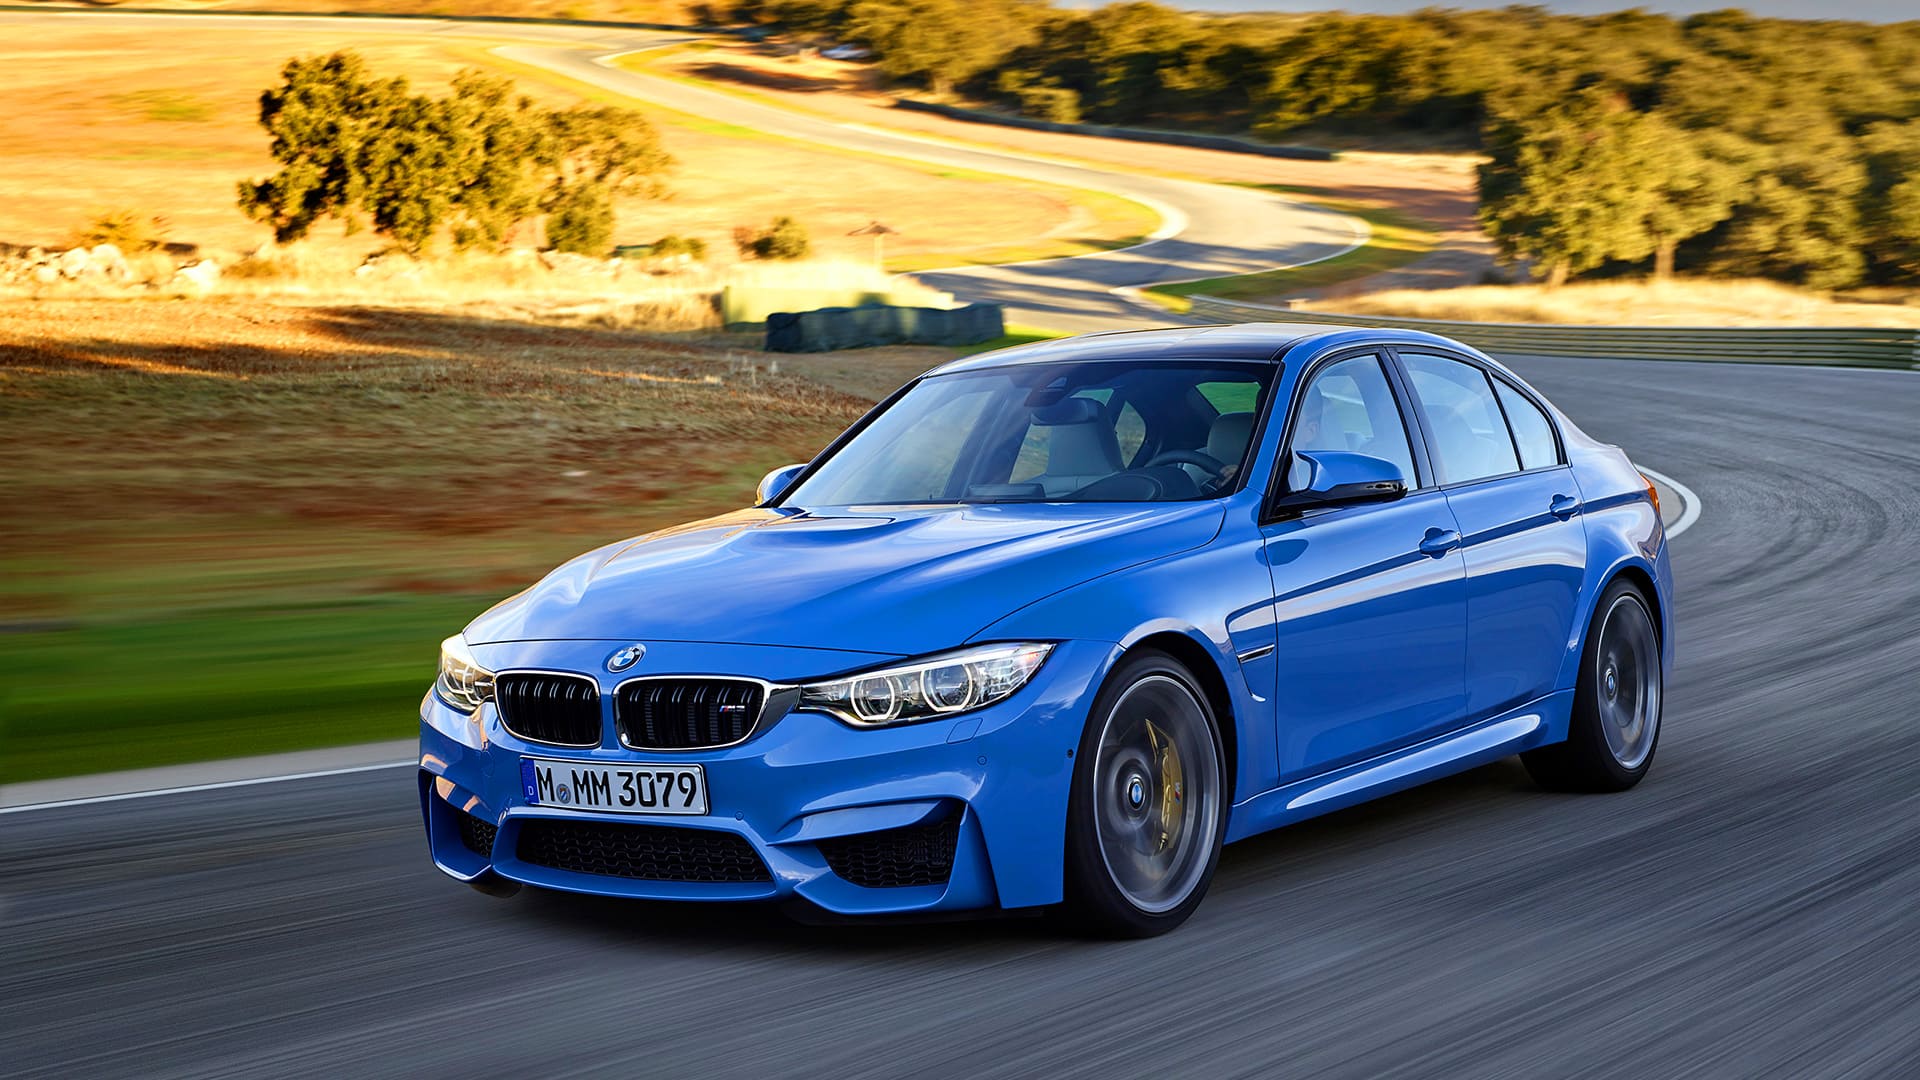 HD BMW M3 Wallpapers